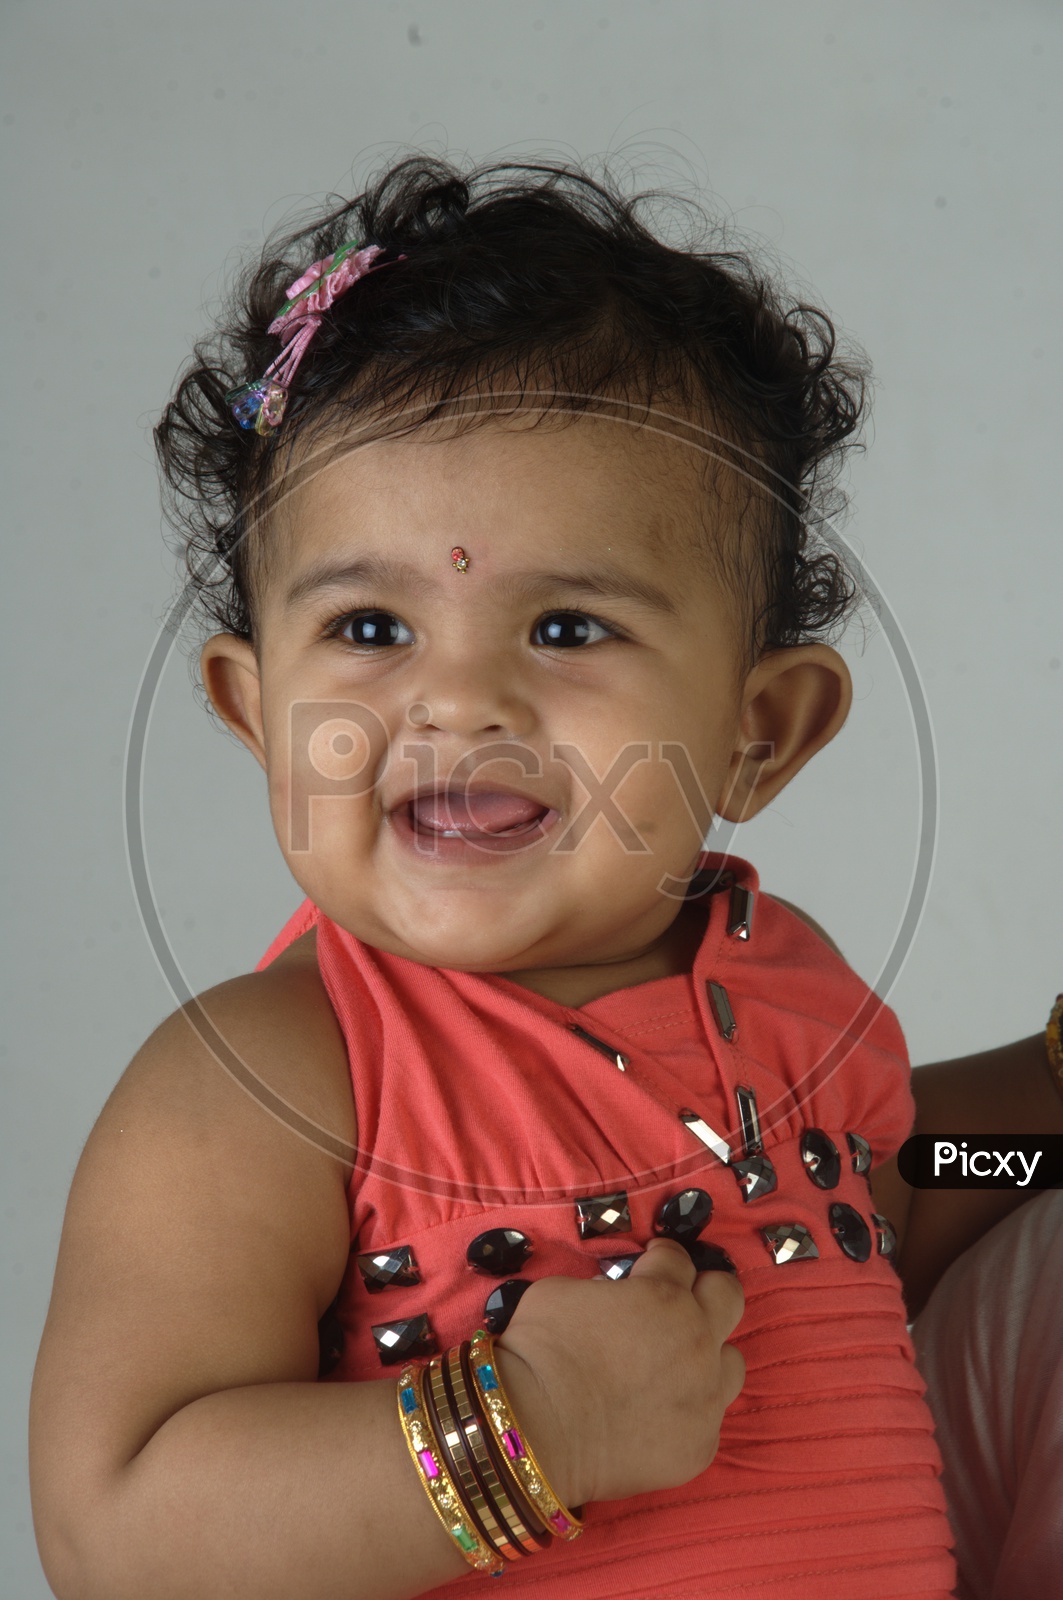 Indian Girl kid in a studio smiling